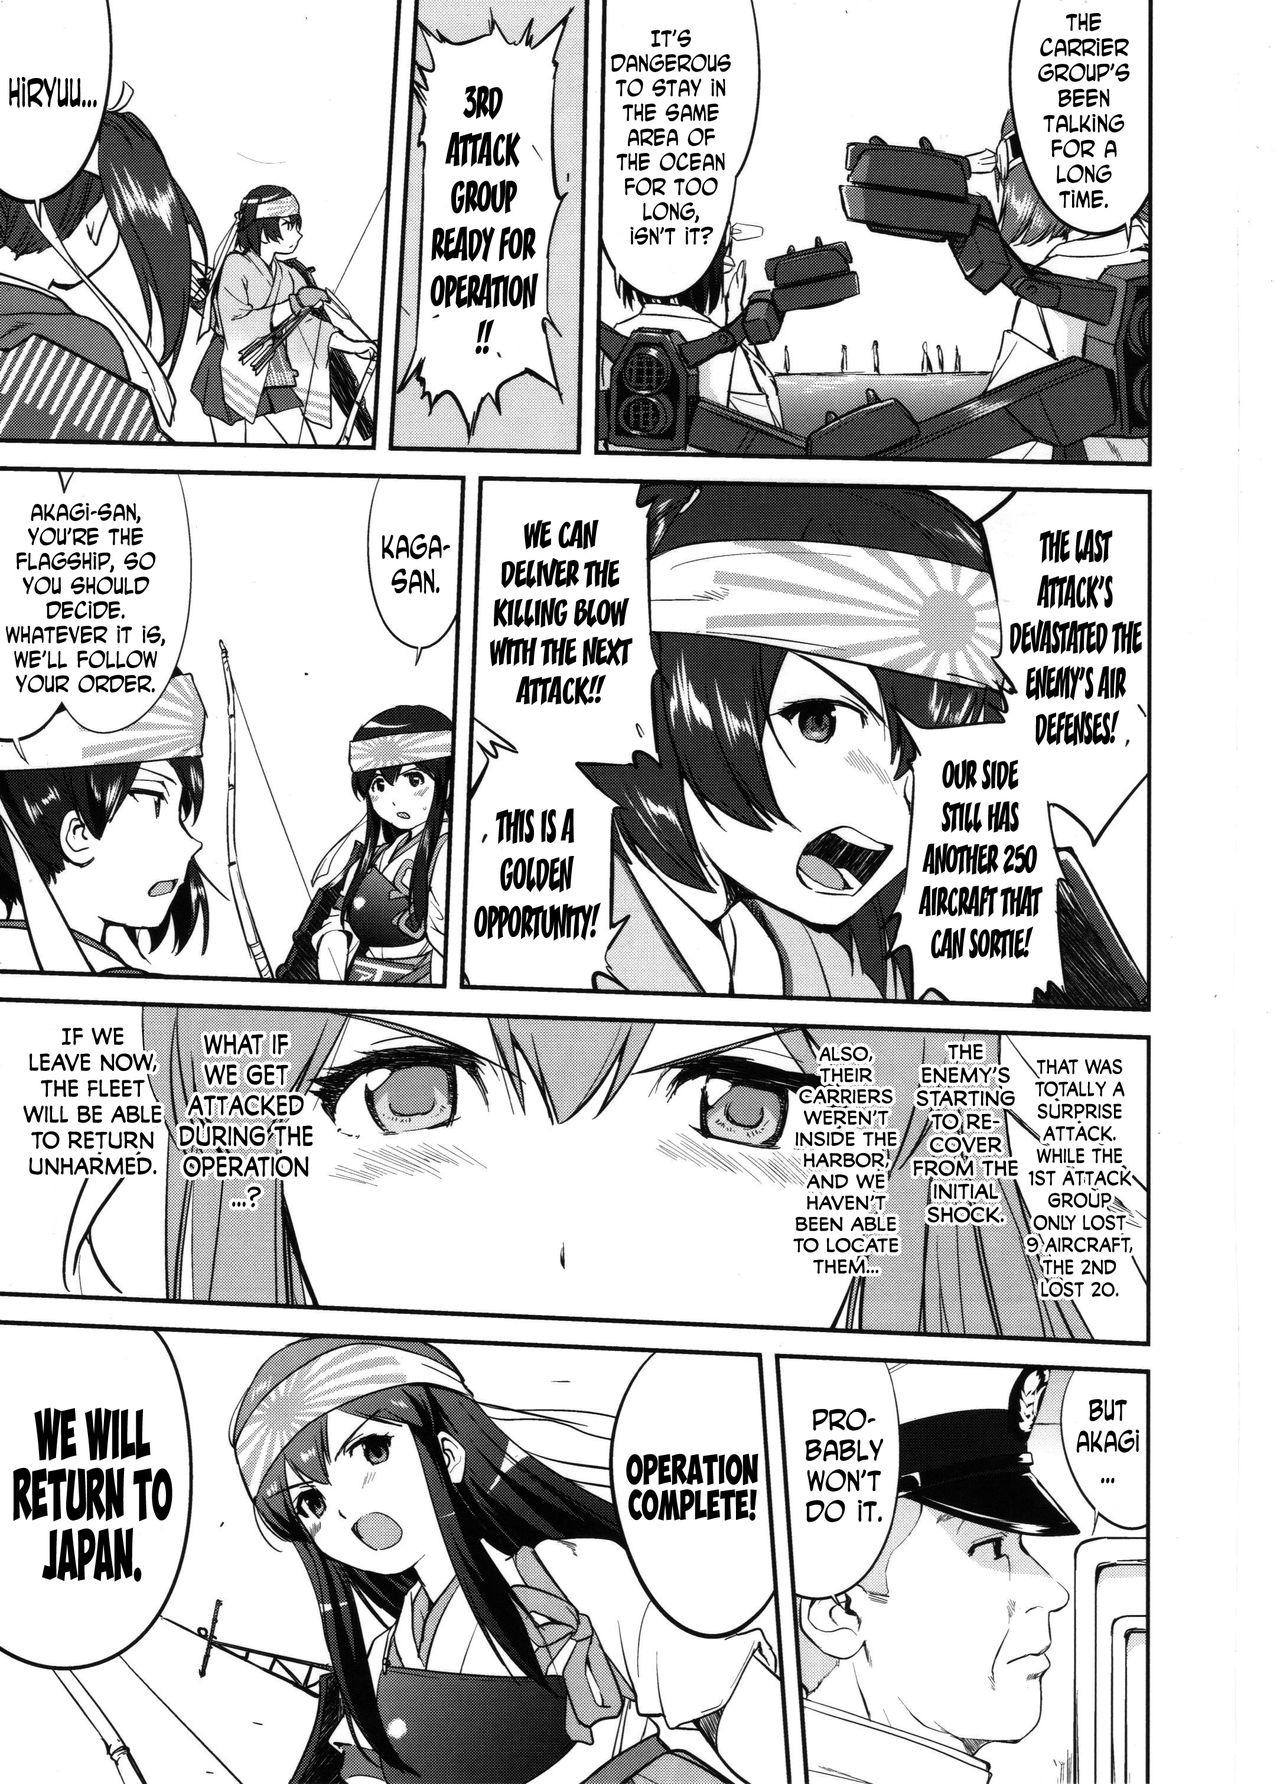 Animation Teitoku no Ketsudan MIDWAY | Admiral's Decision: MIDWAY - Kantai collection Chaturbate - Page 6